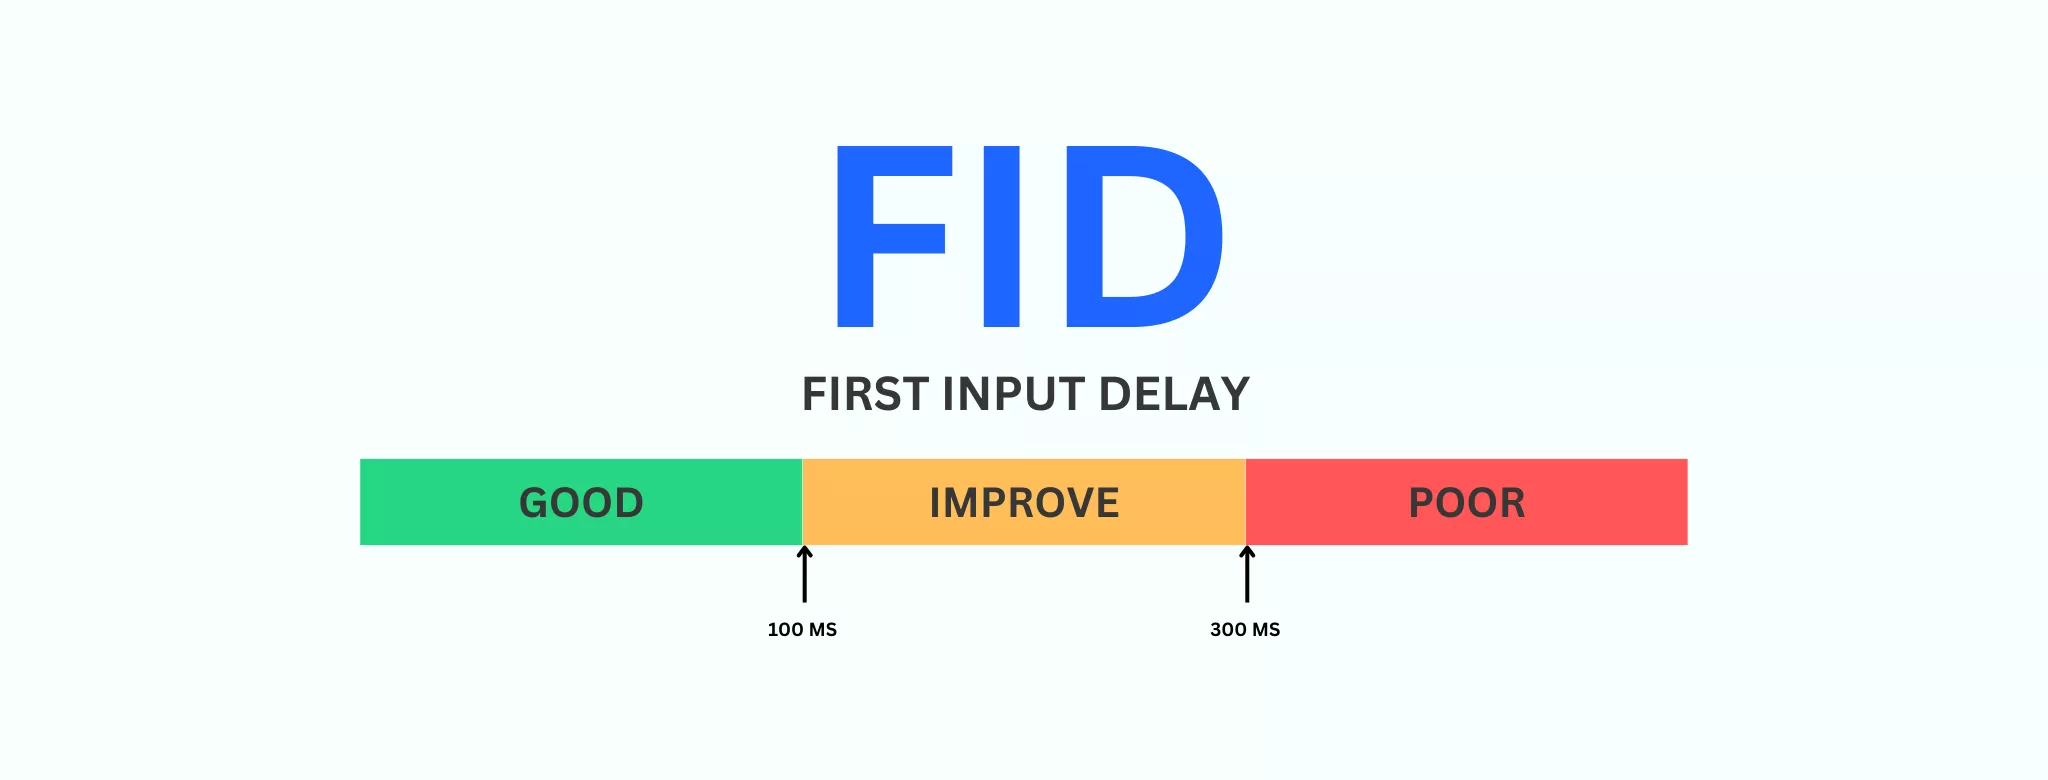 Image showcasing a standard First Input Delay (FID) score, an important WordPress Core Web Vitals metric, reflecting efficient user interaction response time.